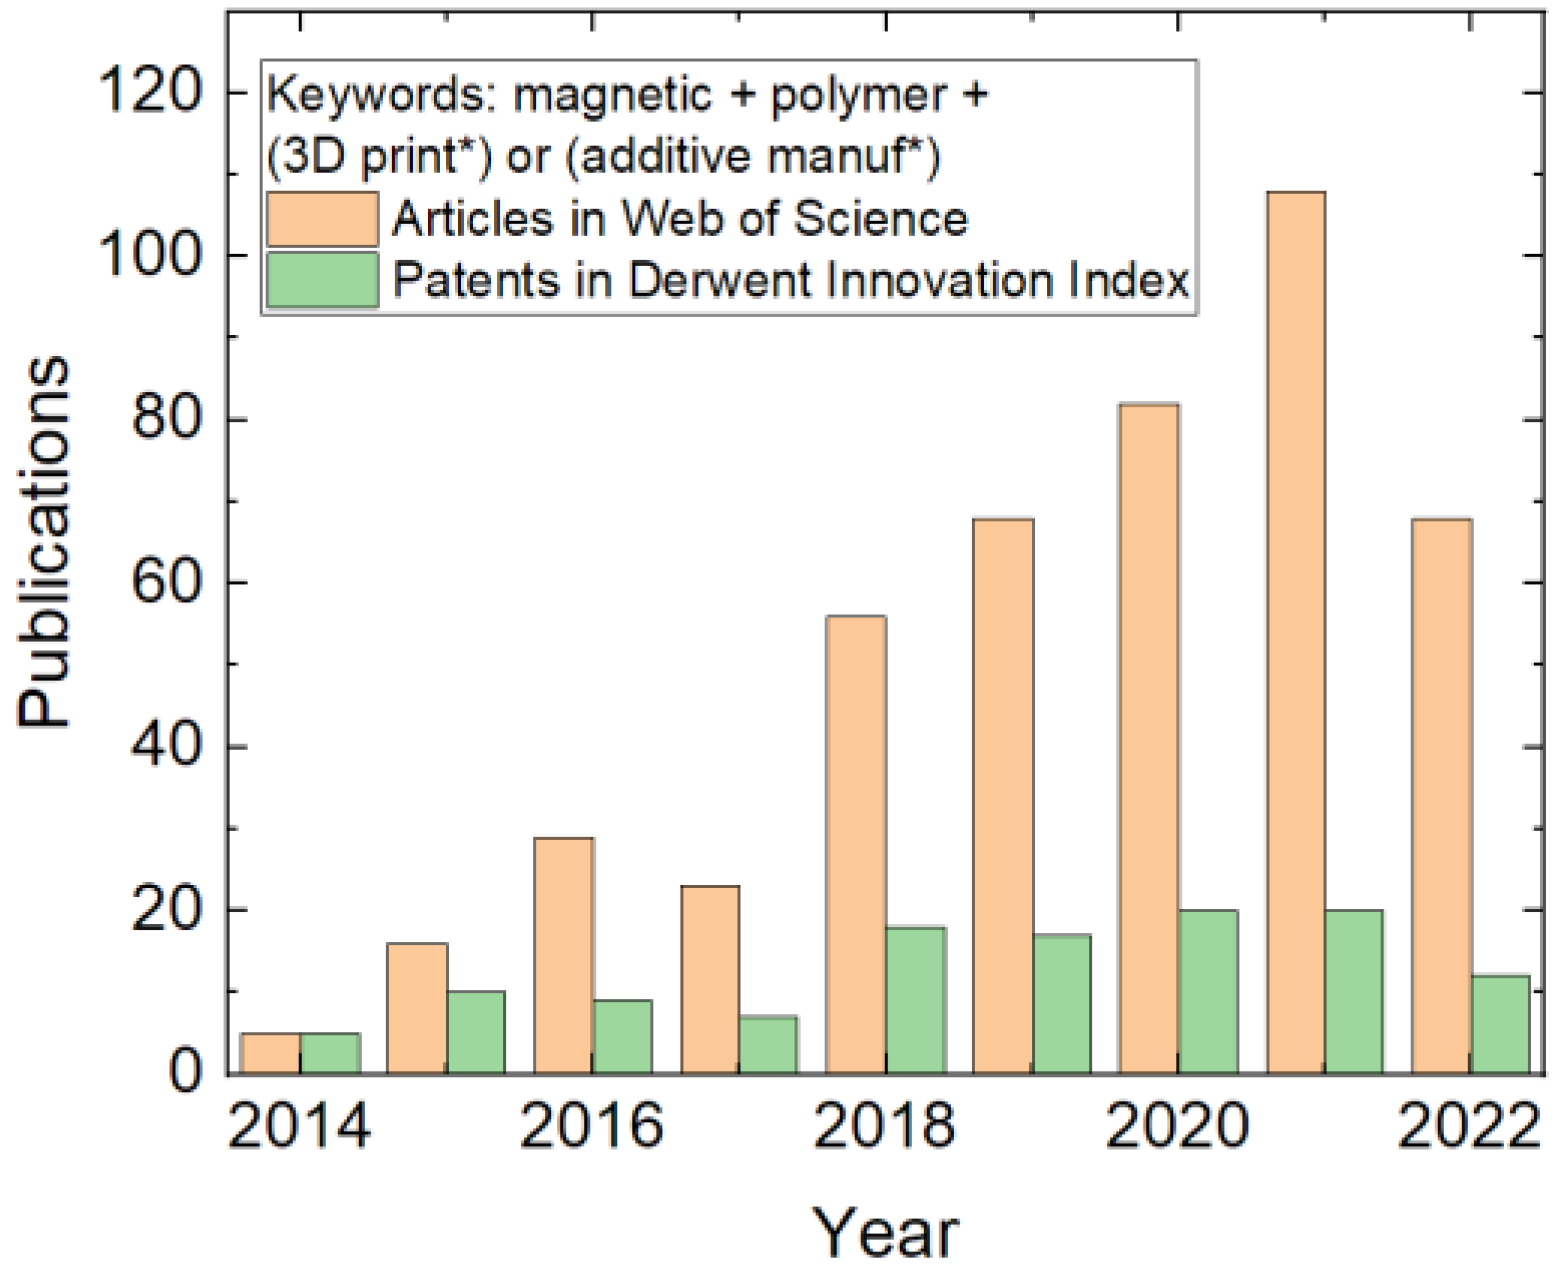 https://www.mdpi.com/polymers/polymers-14-03895/article_deploy/html/images/polymers-14-03895-g001.png